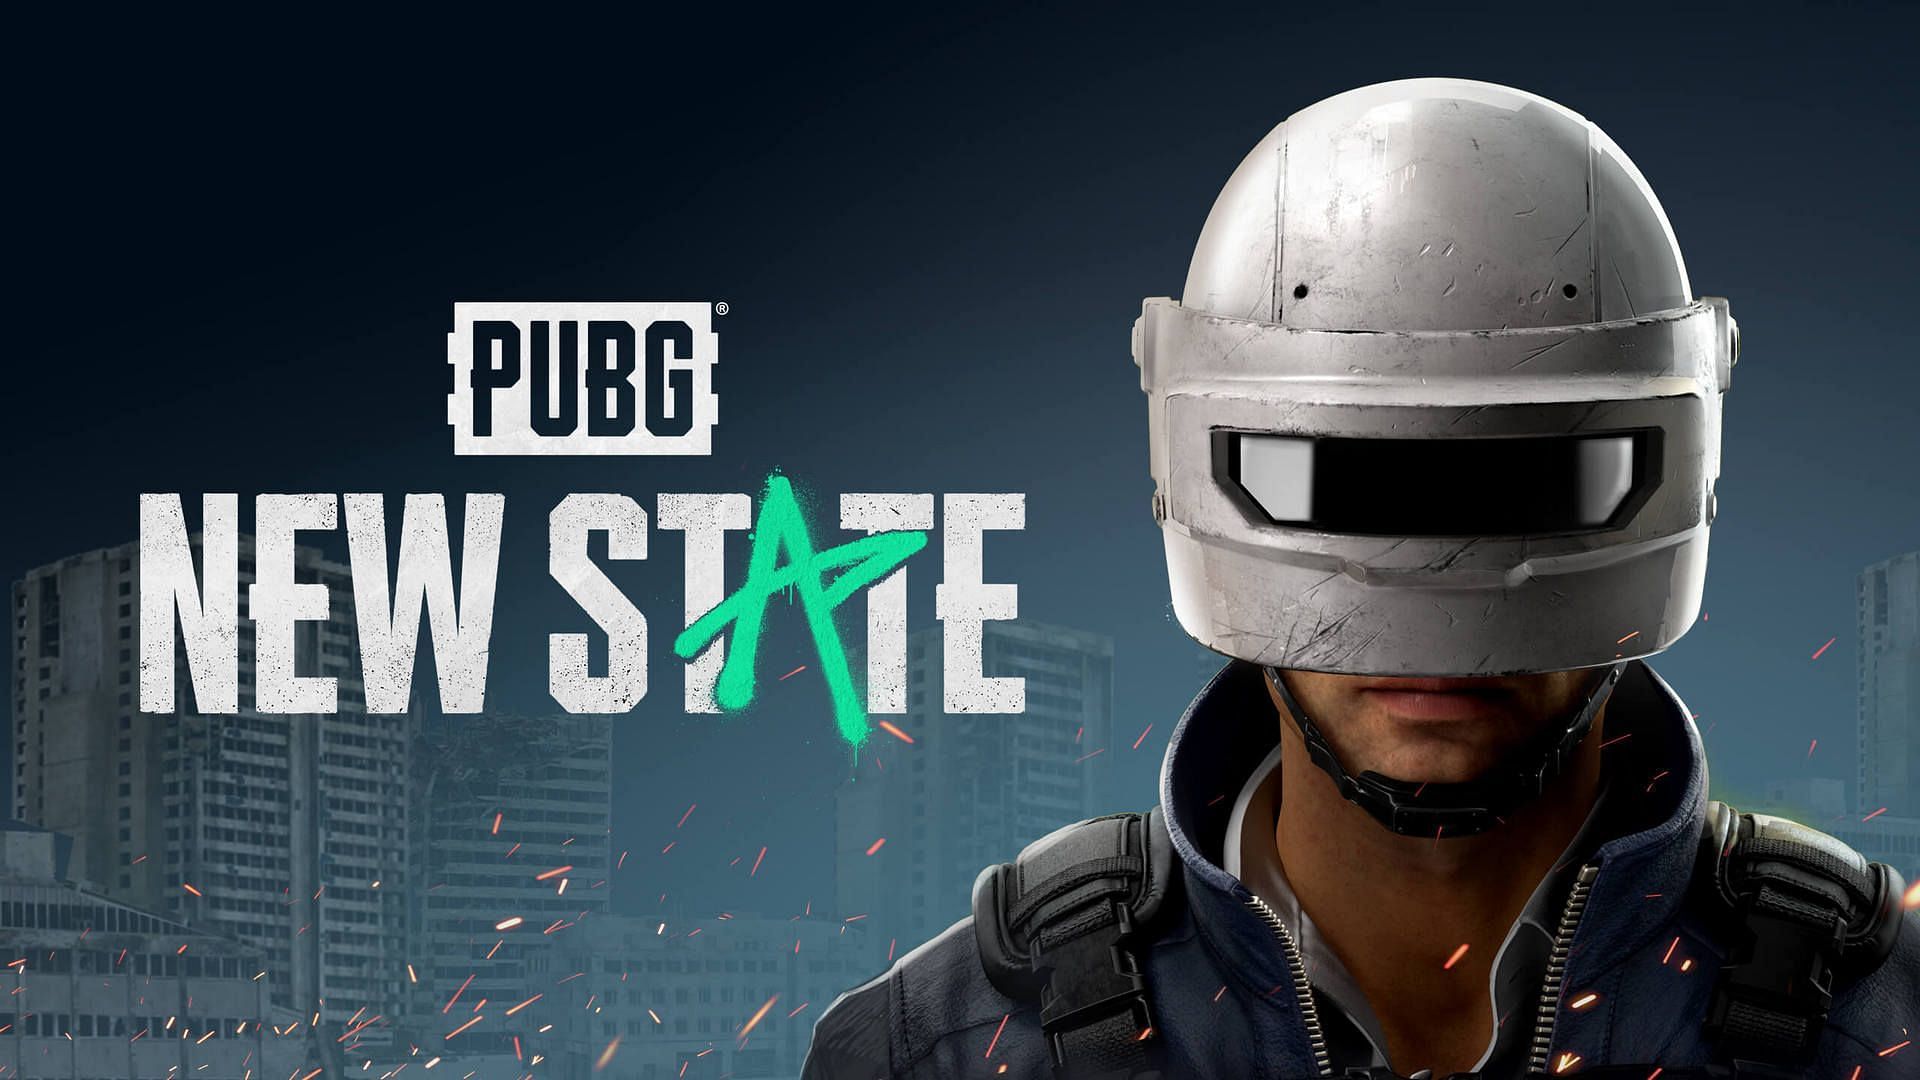 PUBG: New State (Mobile) official website, launch date for all regions, and early reward revealed (Image via PUBG: New State)